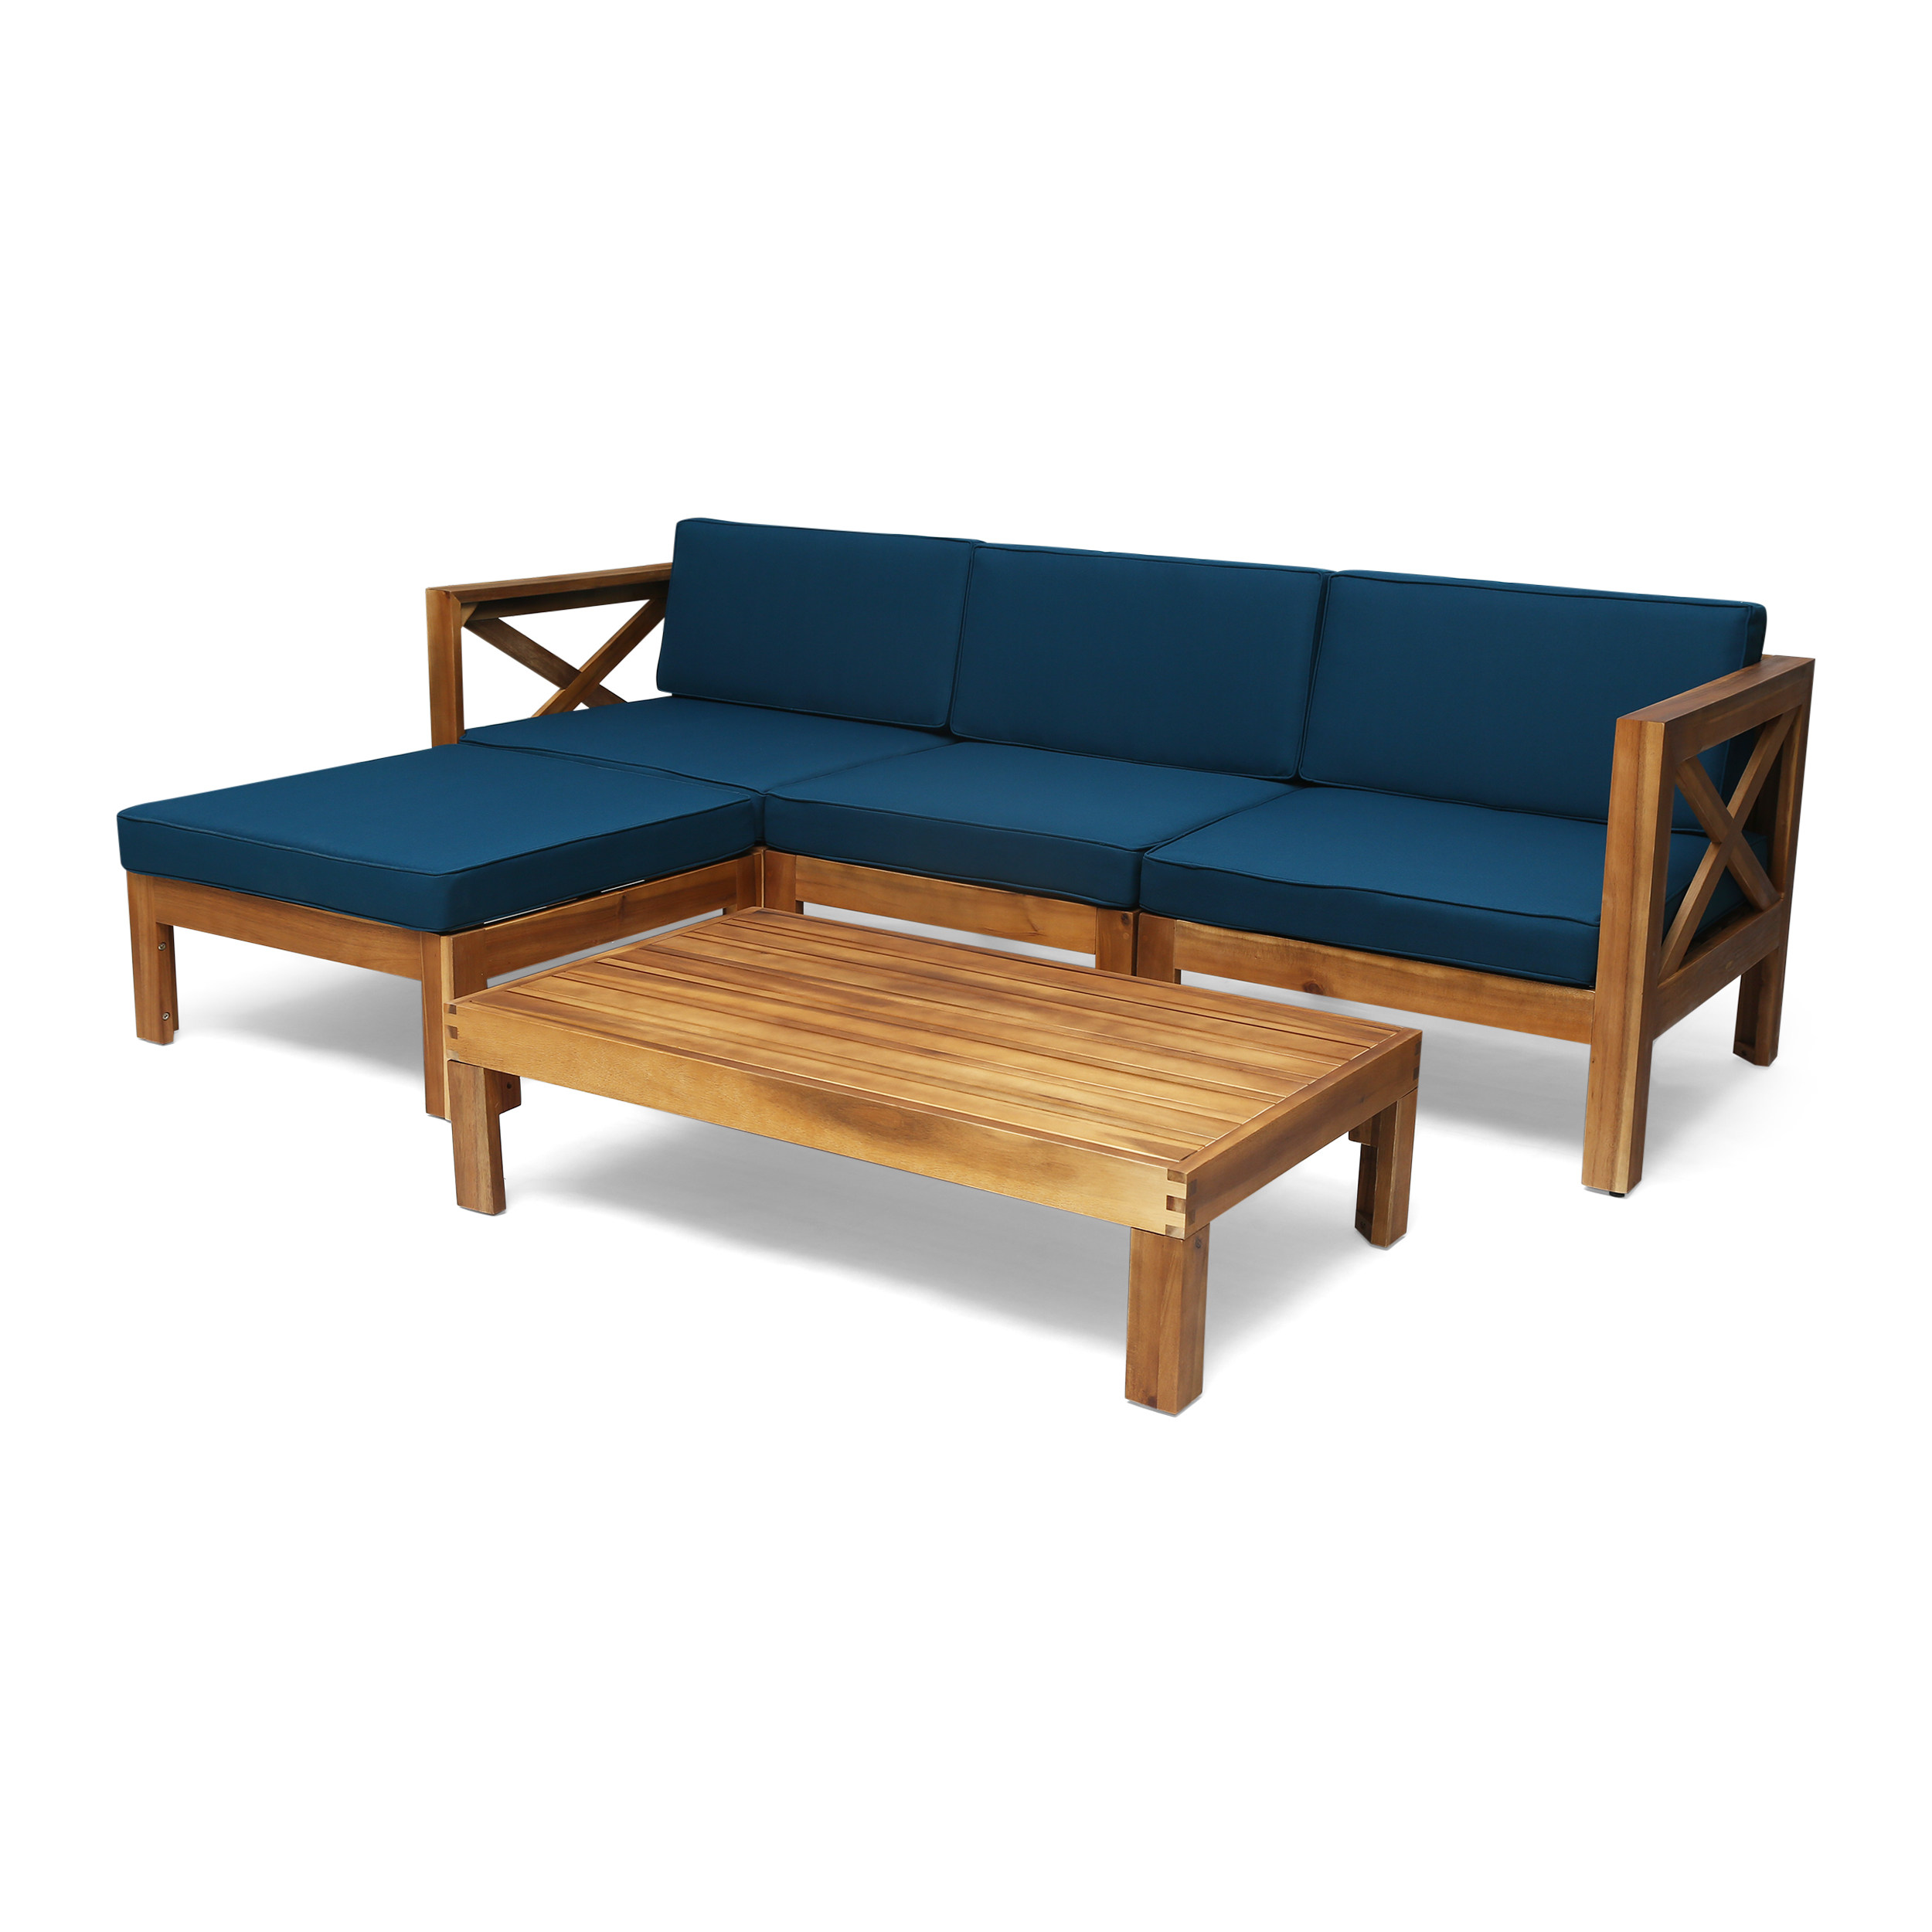 Mamie Outdoor Acacia Wood 5 Piece 3-Seater Sectional Sofa Set, Teak and Dark Teal - image 1 of 15